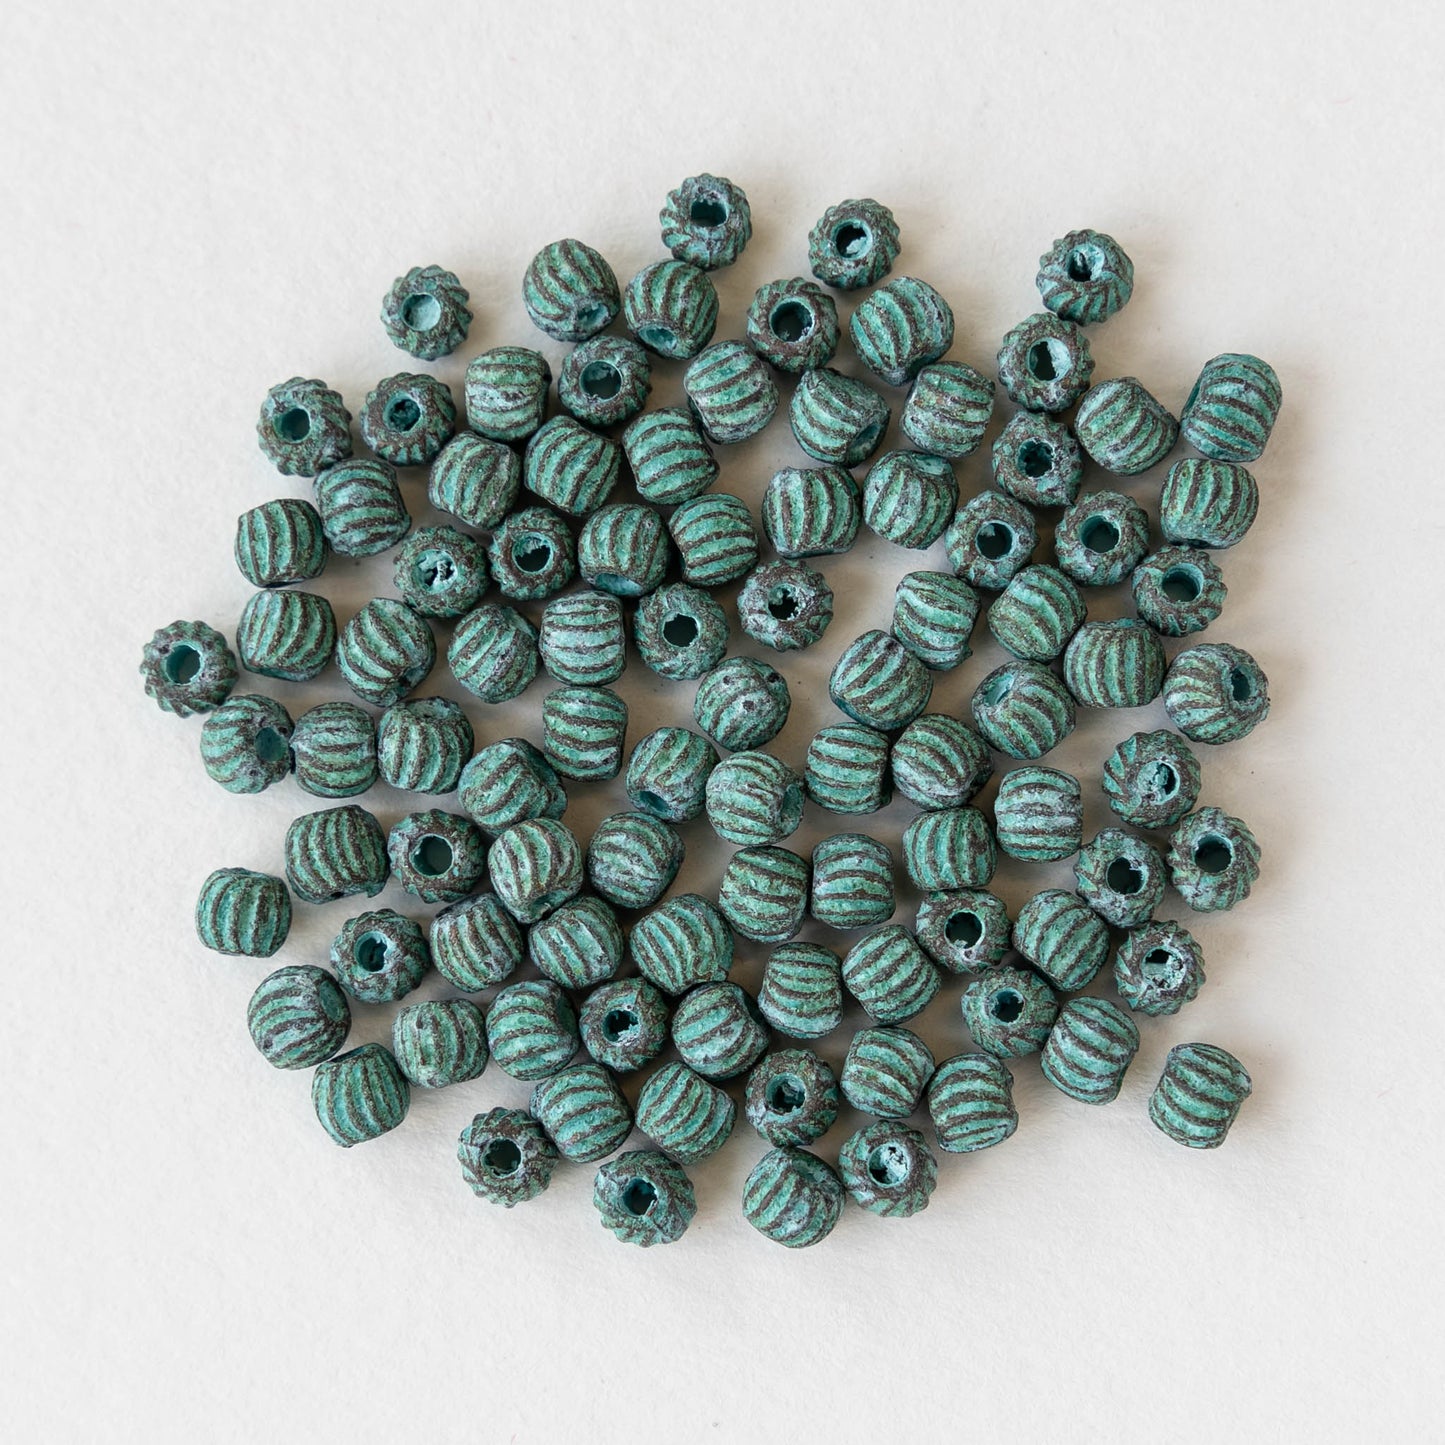 4mm Round Fluted Beads - Green Patina - 10